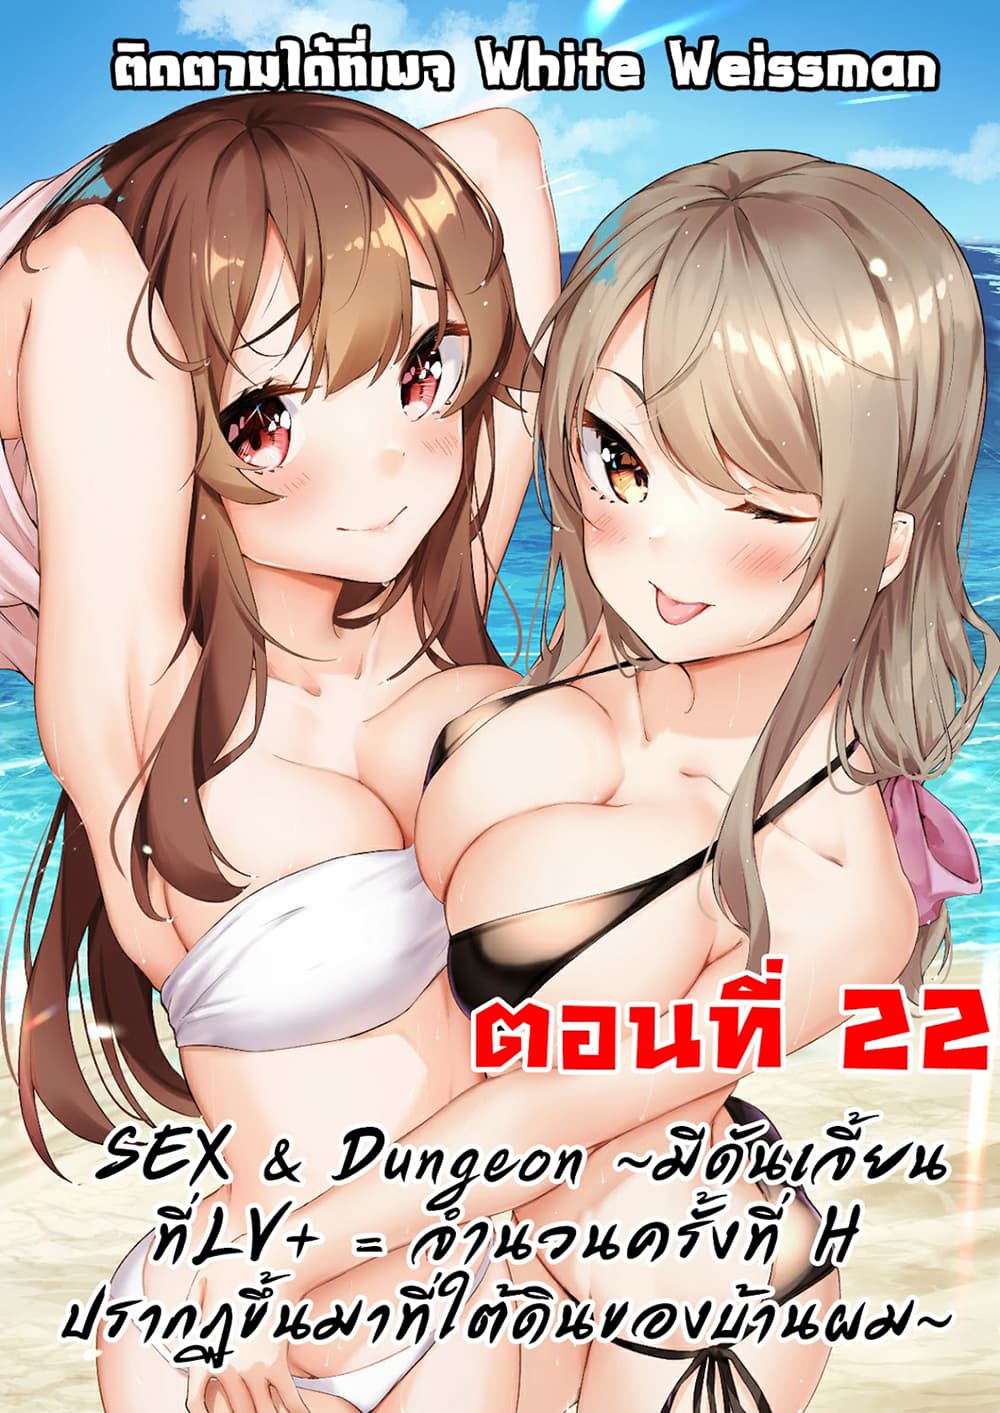 Sex and Dungeon! 22-22